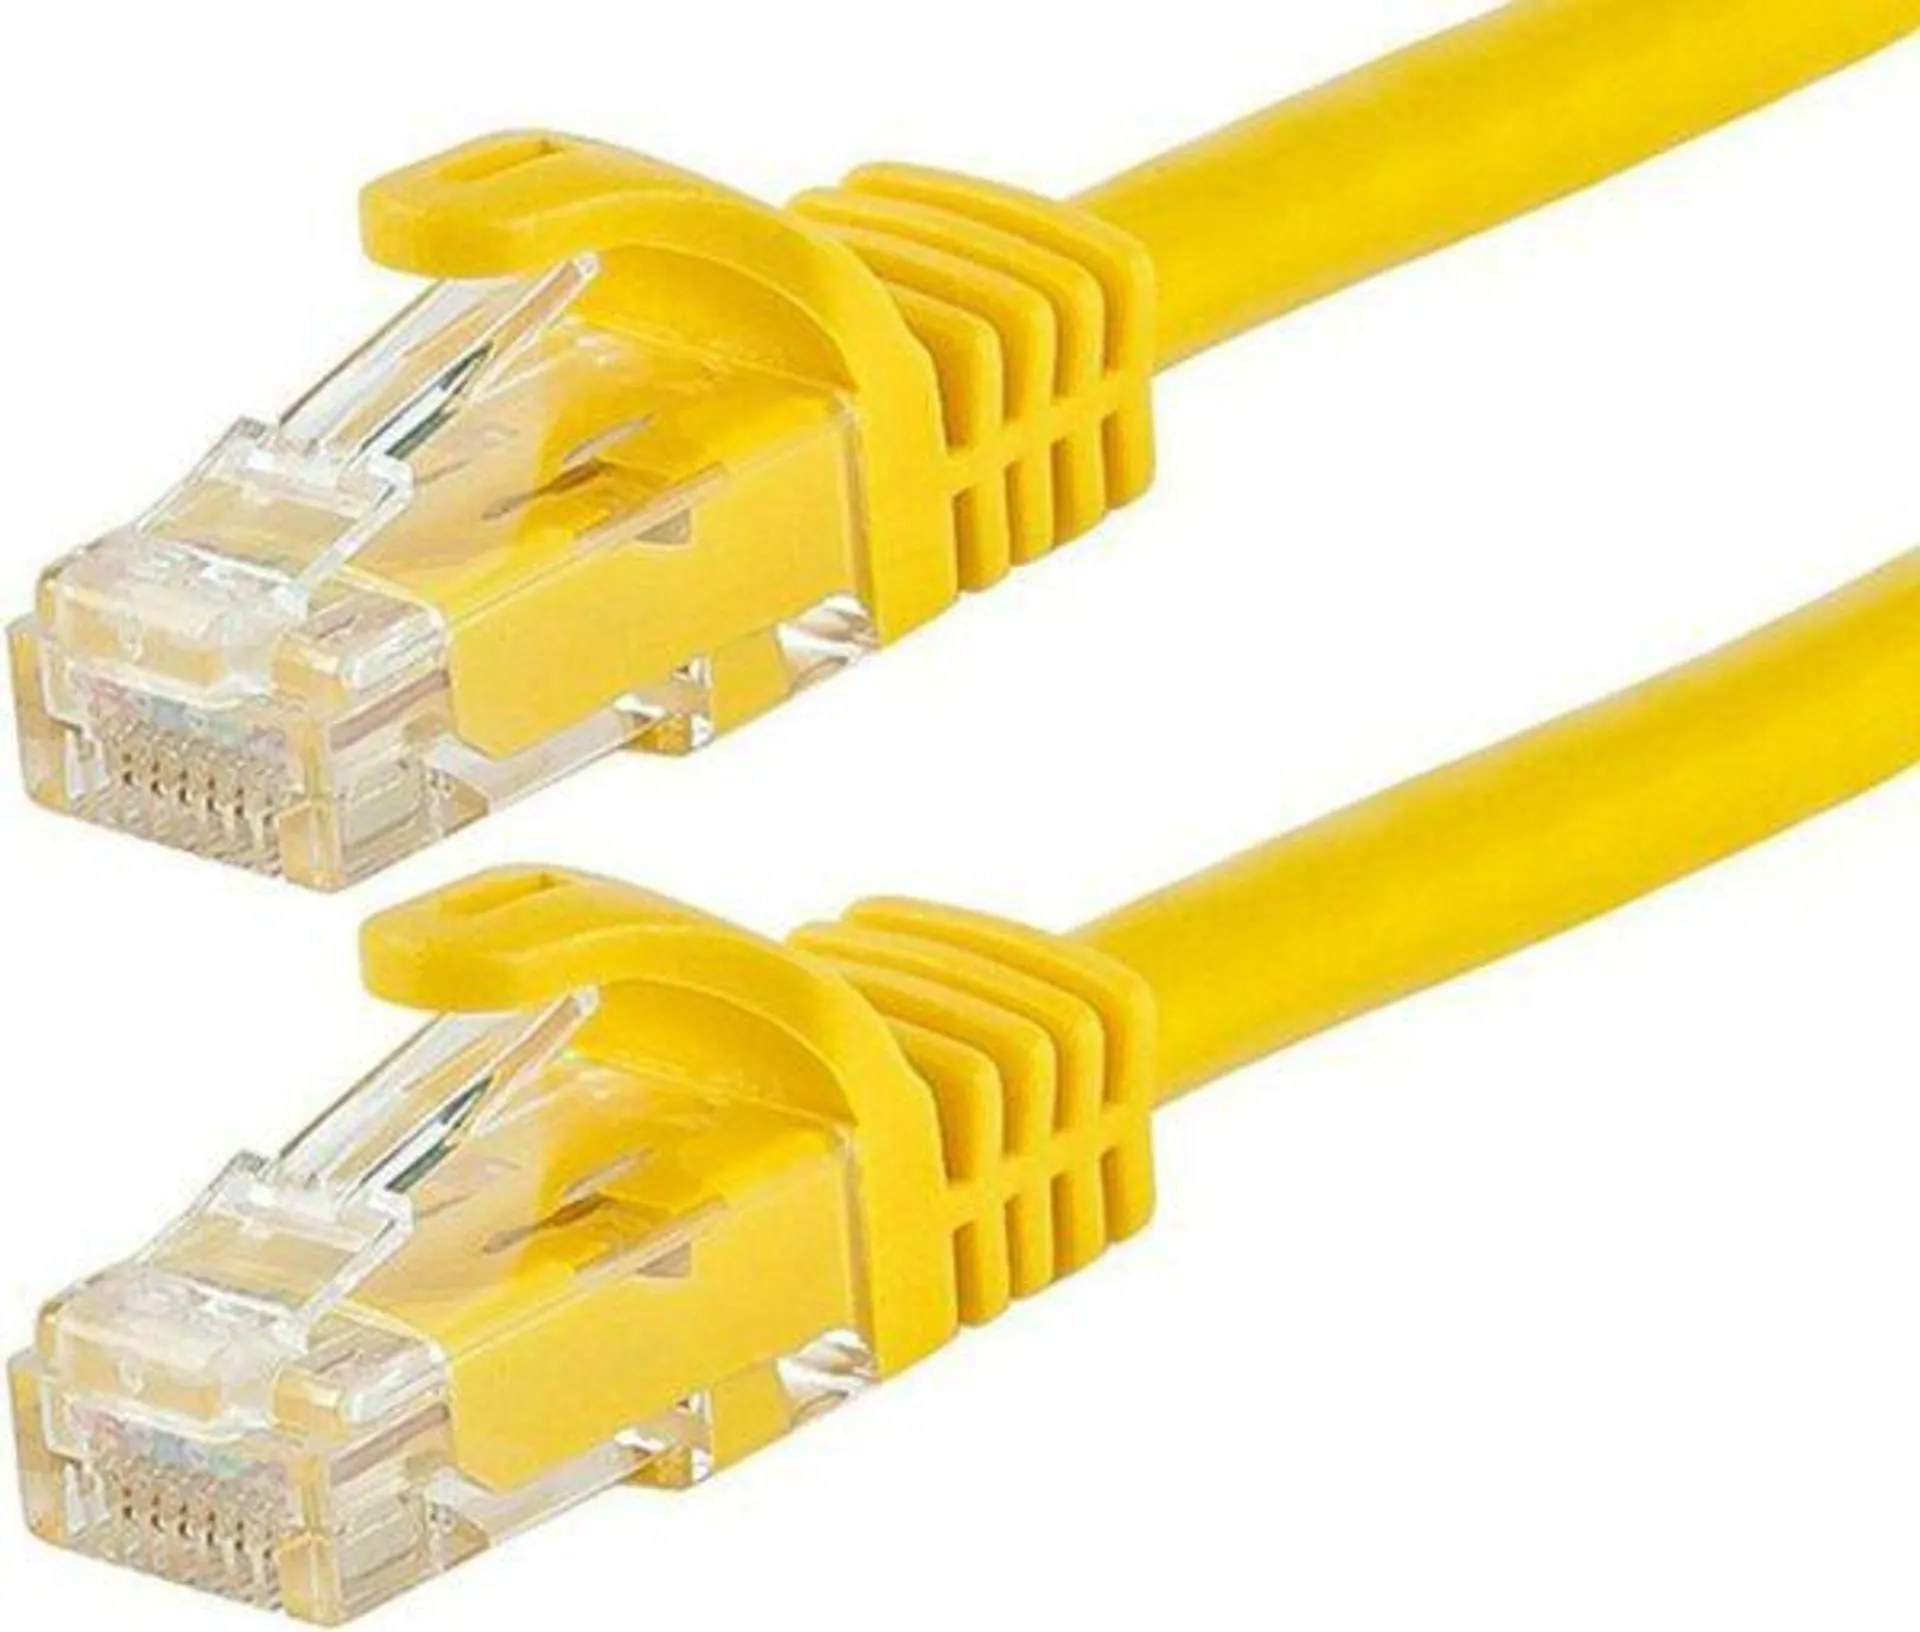 LINKQNET 5M CAT5E MOULDED FLYLEAD YELLOW